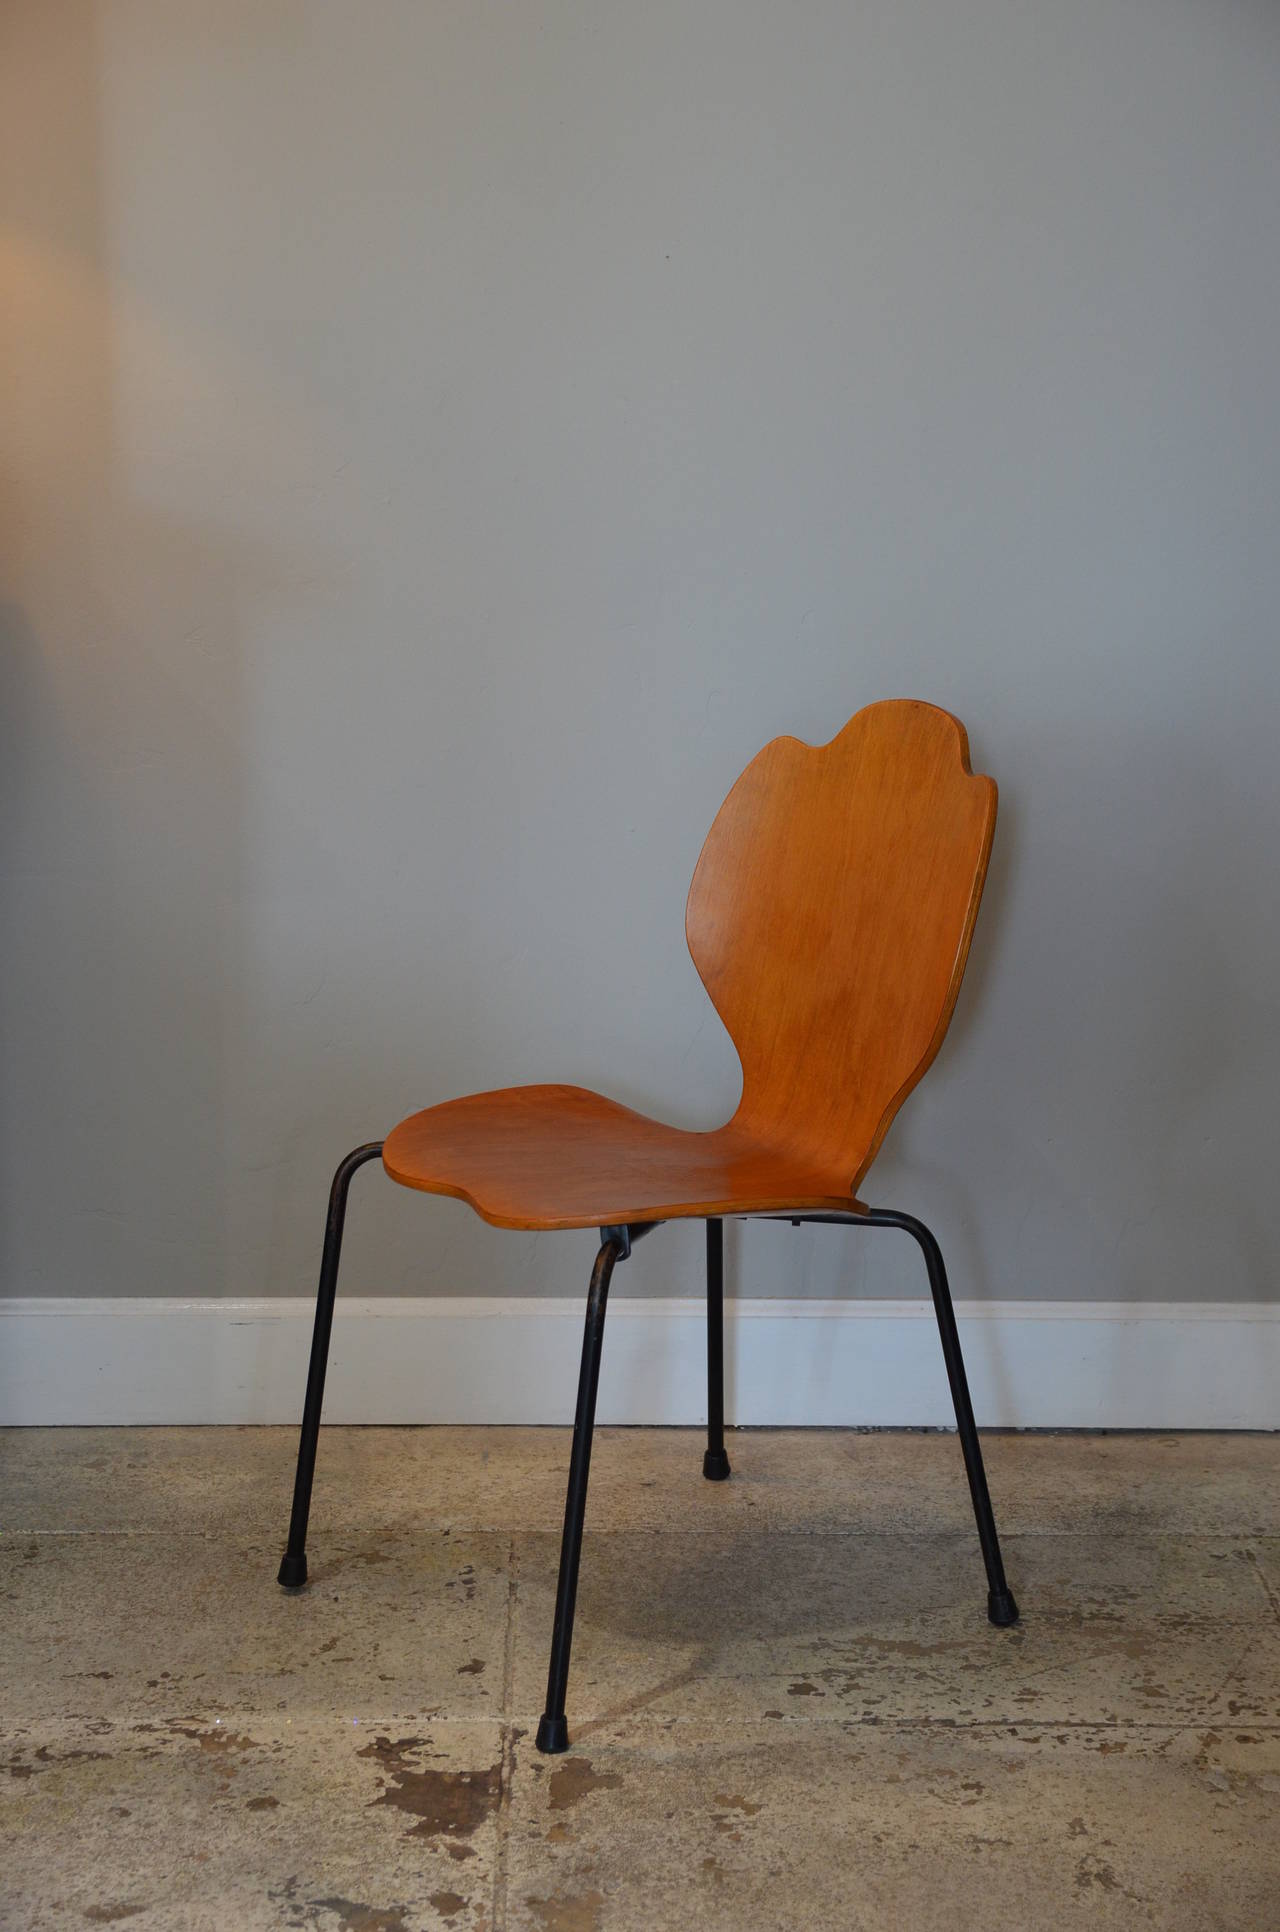 Experimental one-of-a-kind Arne Jacobsen bentwood side chair. Unusual seat and back shape. Very comfortable. Stamped 'MADE IN DENMARK'.